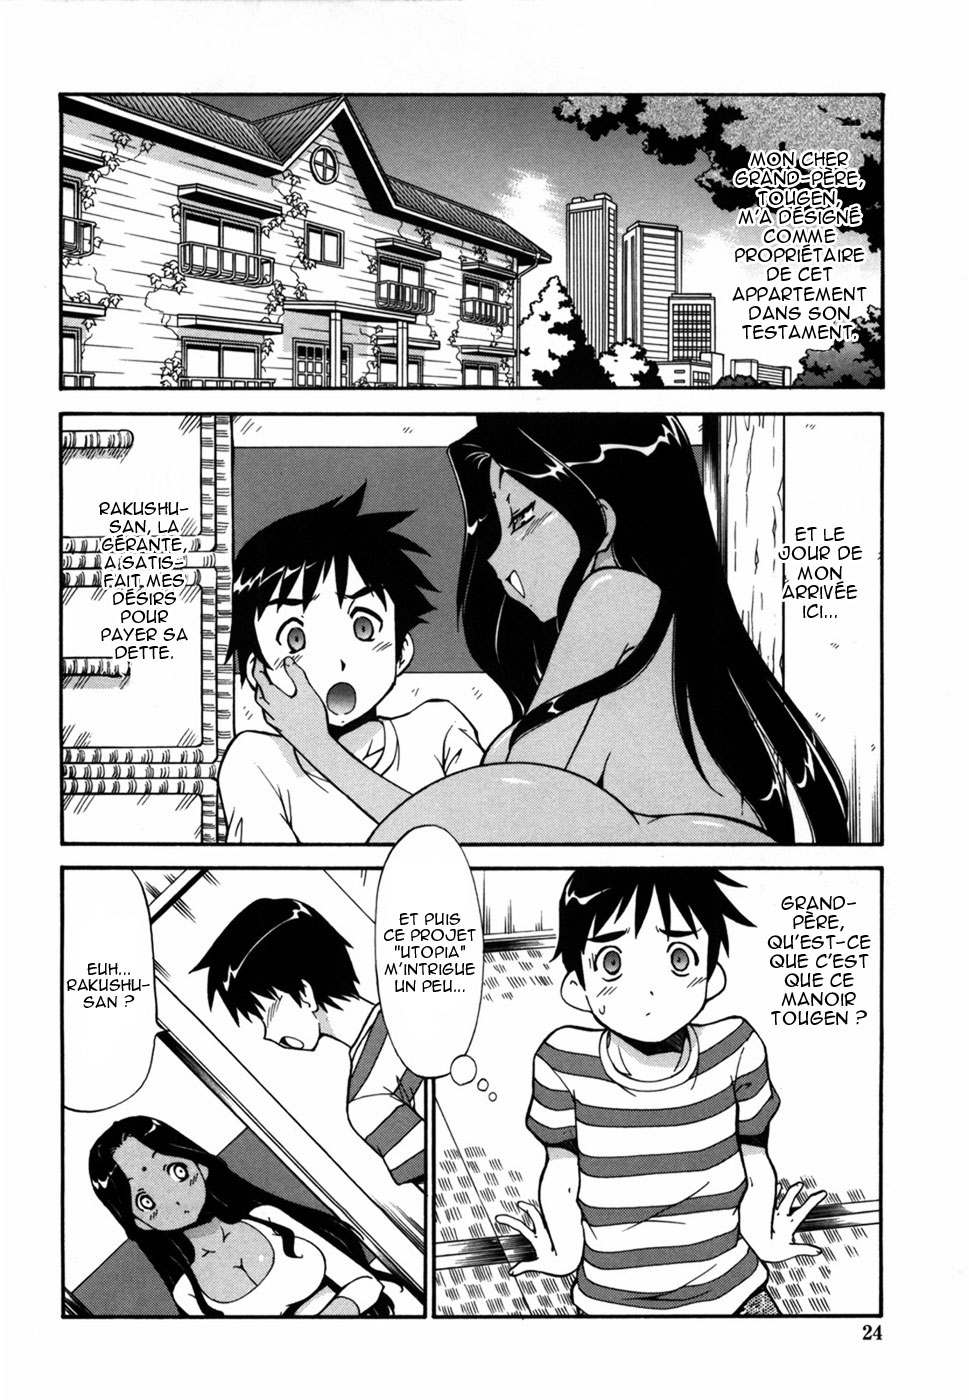 (C-S) Safety Lodging House Utopian Chap.2 [French][Uncensored] 